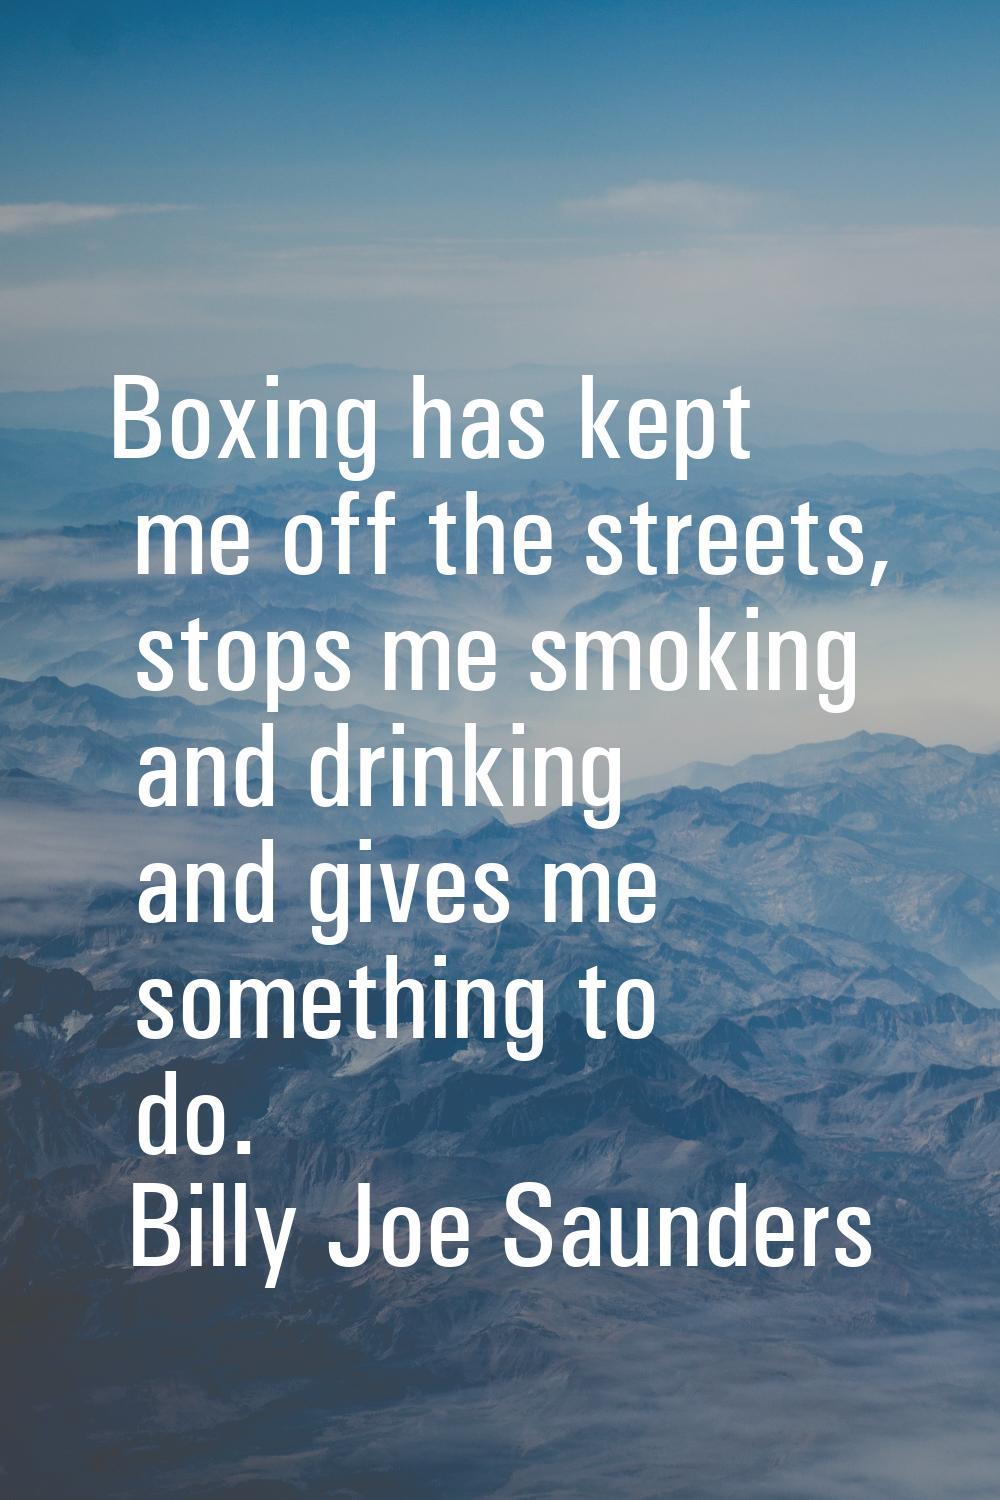 Boxing has kept me off the streets, stops me smoking and drinking and gives me something to do.